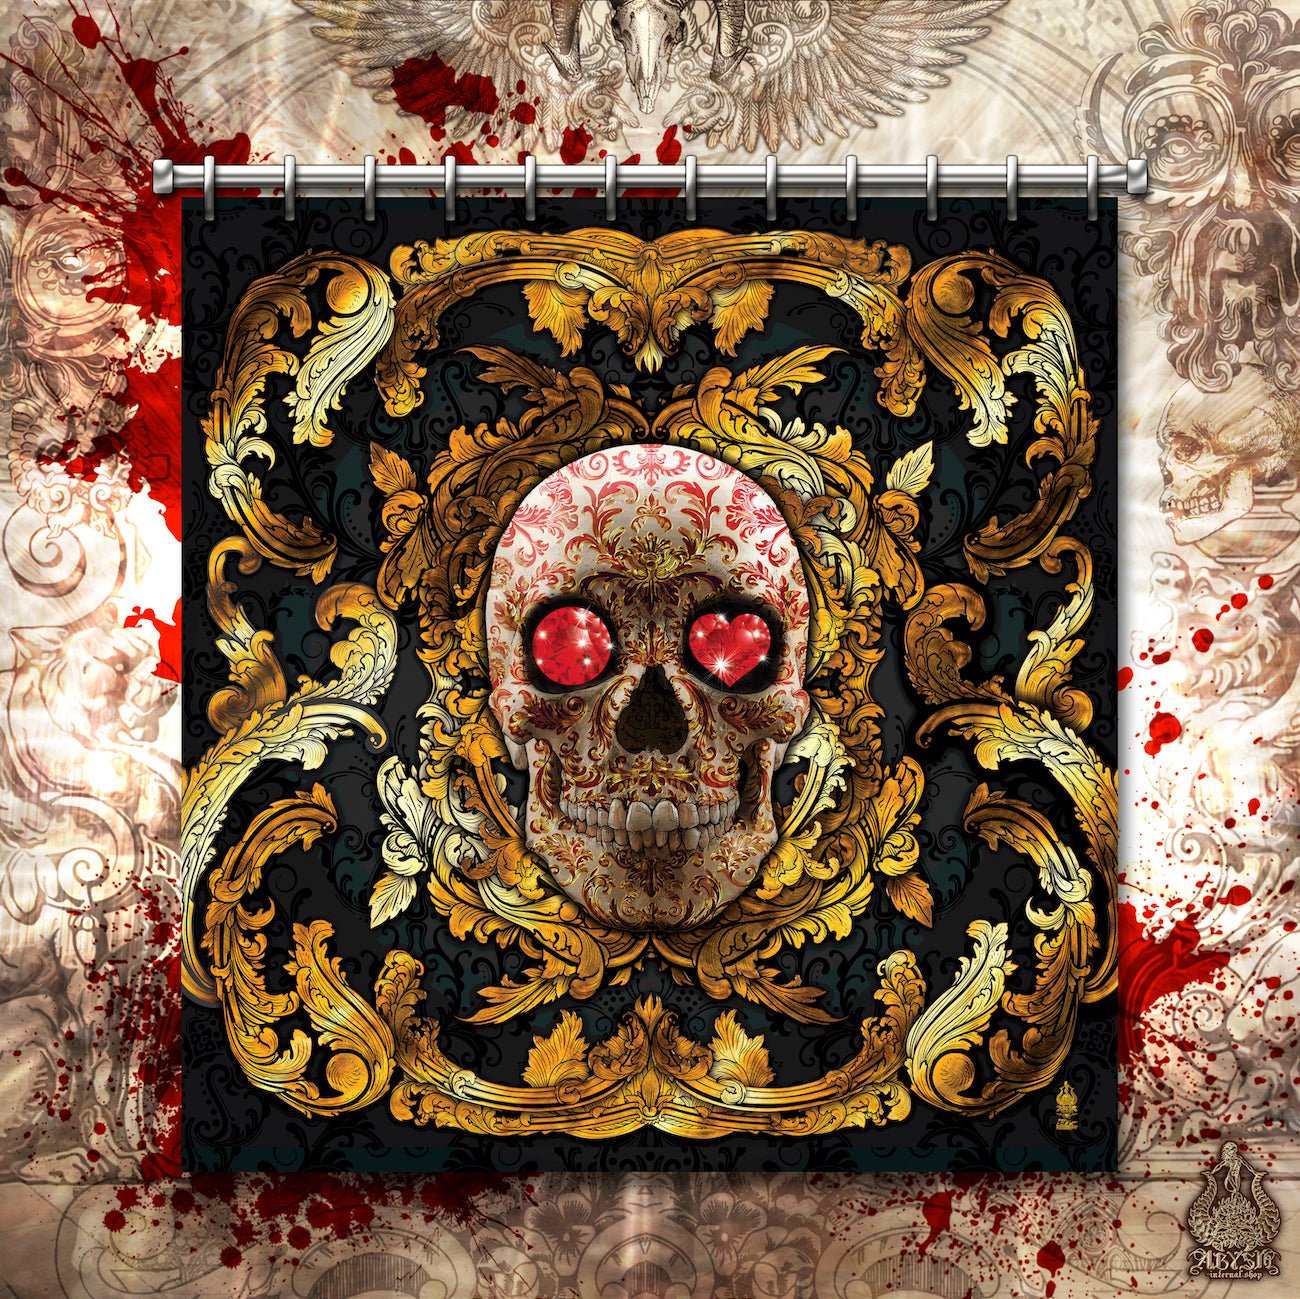 Skull Shower Curtain, 71x74 inches, Victorian Bathroom Decor, Baroque, Macabre Decor - Gold and Silver, 4 Colors - Abysm Internal